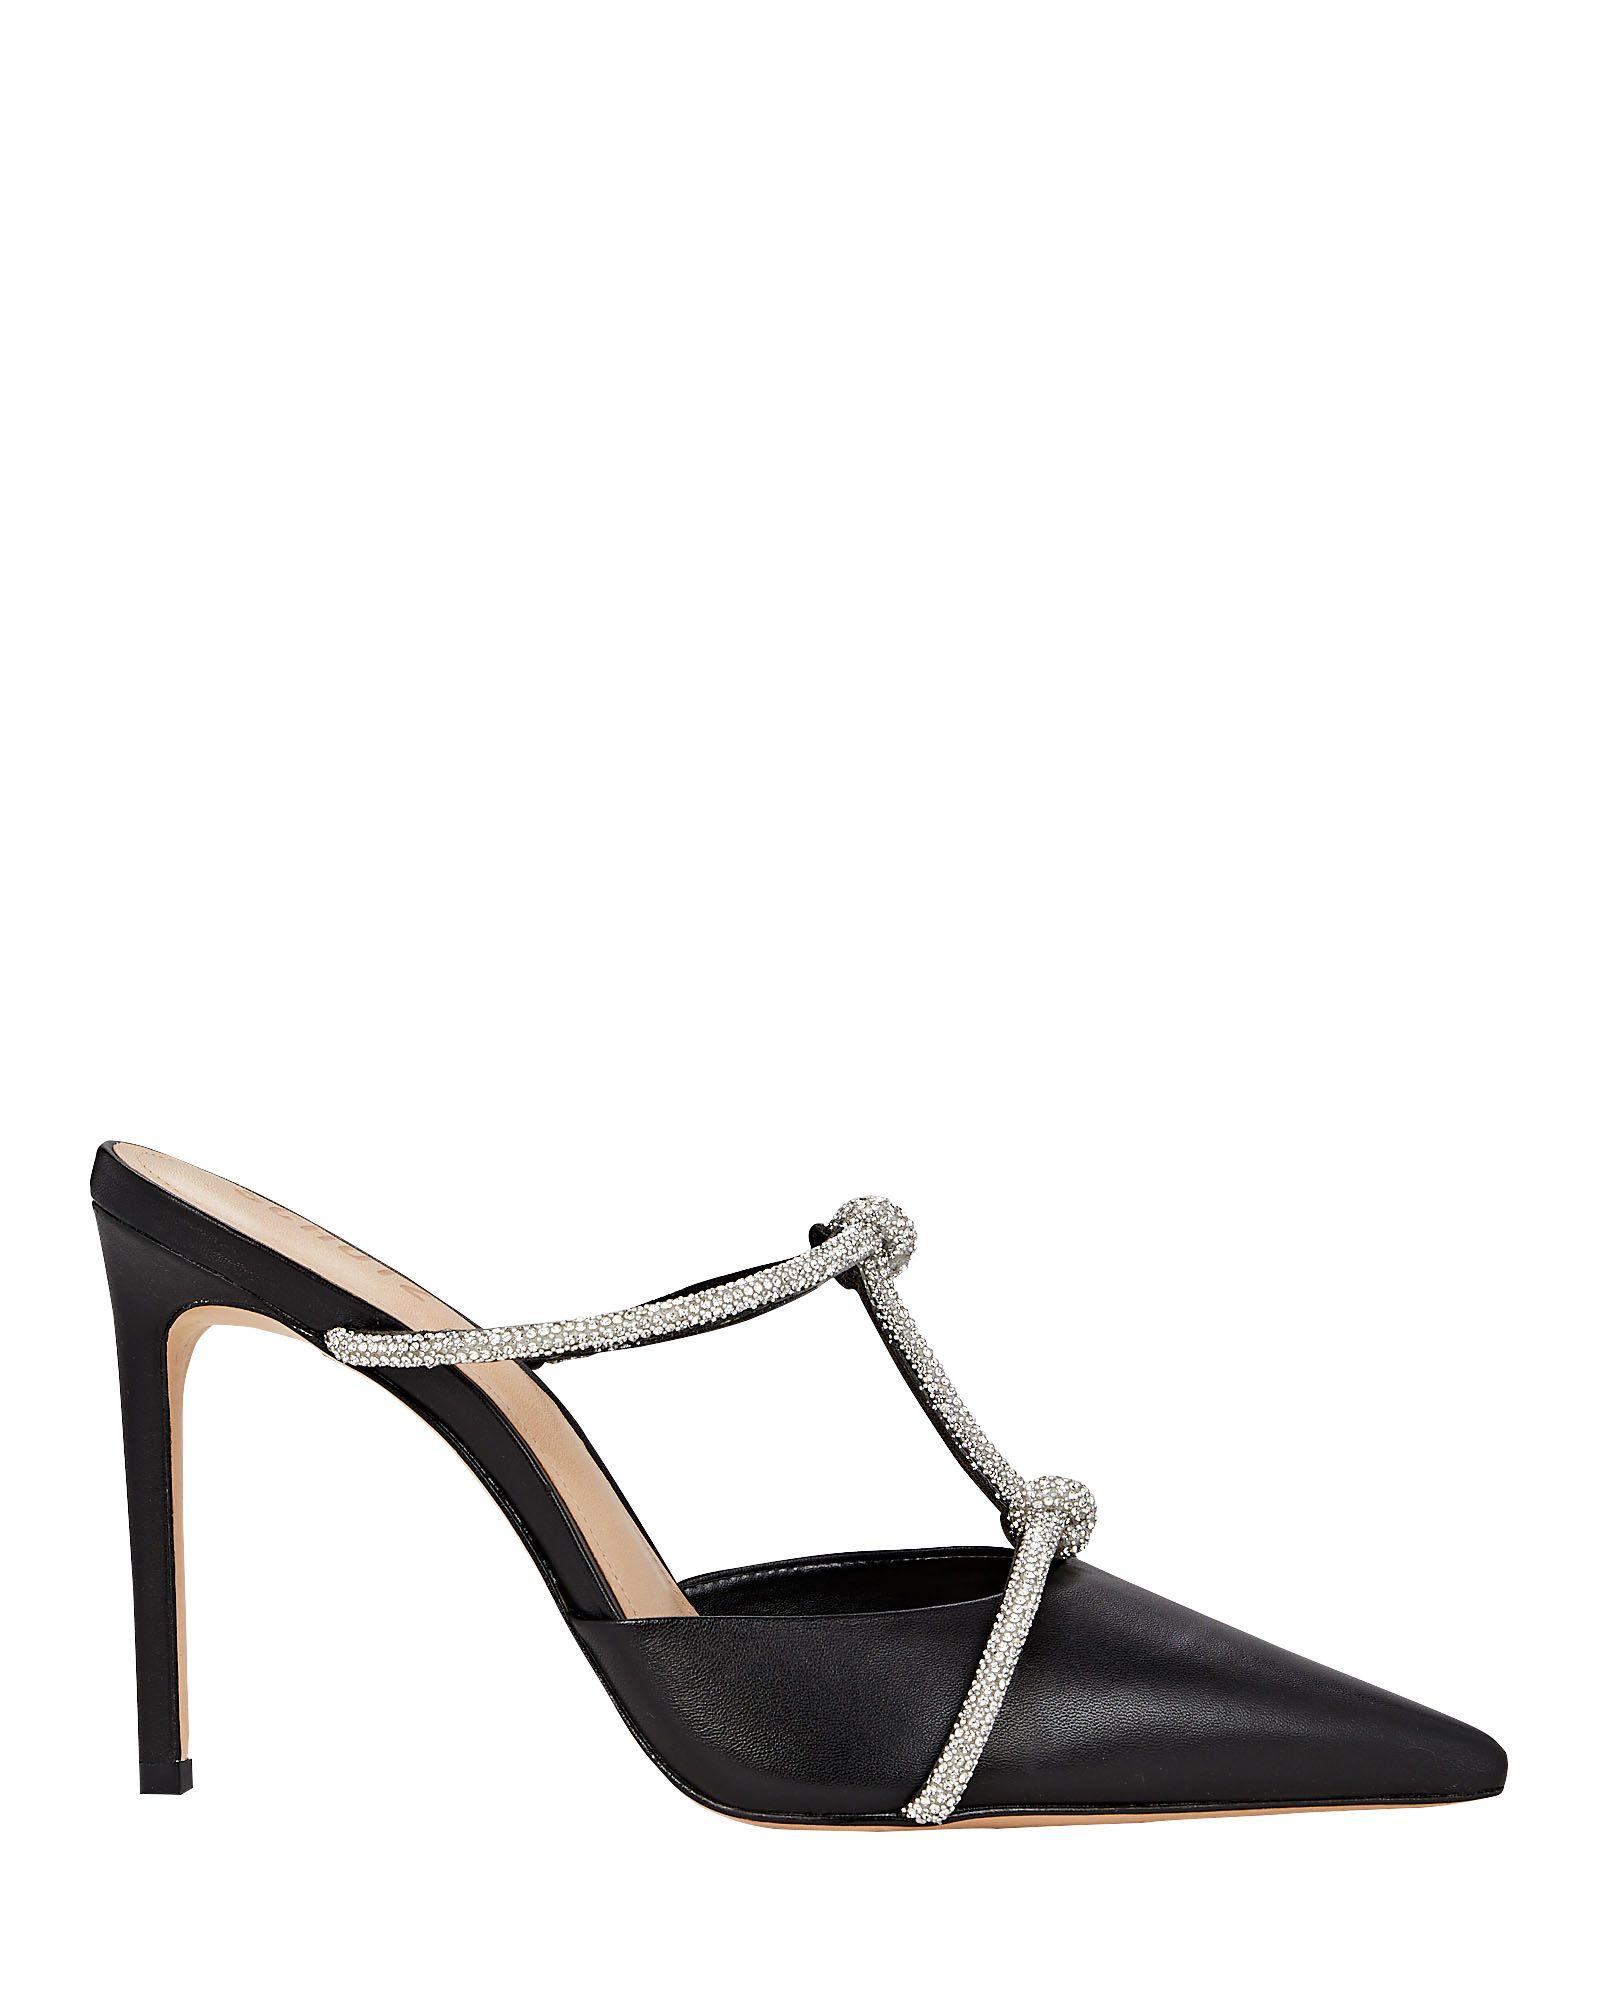 SCHUTZ SHOES Sylvie Crystal-embellished Mules in Black | Lyst